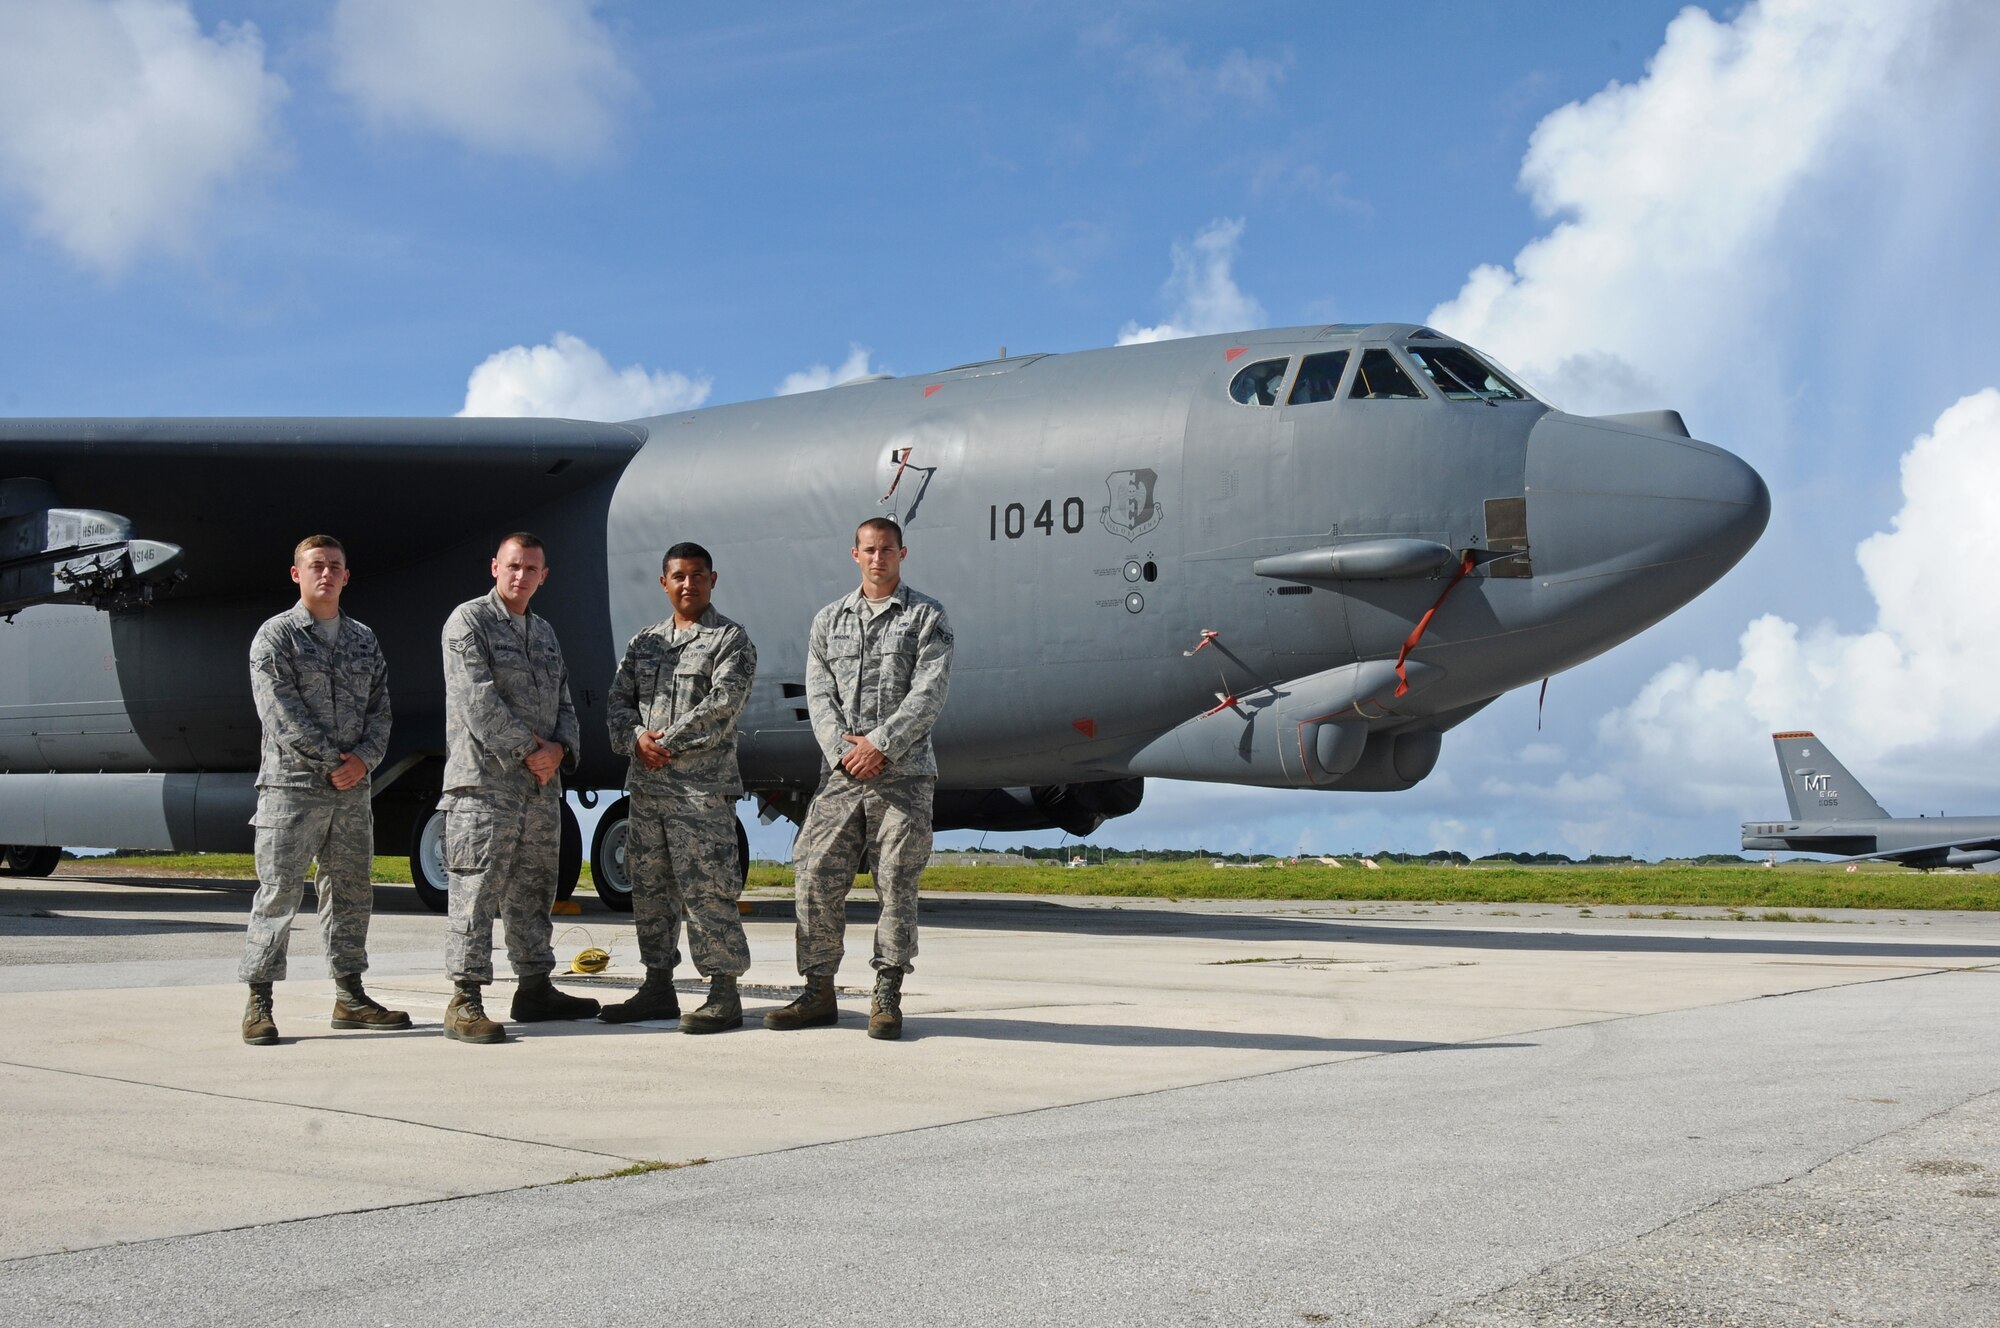 ANDERSEN AIR FORCE BASE, Guam  -- "Nine-O-Nine" award winners Airman 1st Class Jordon Dyer, Staff Sgt. Timothy Beamesderfer, Staff Sgt. Jim Alcozer and Airman 1st Class Michael Lawhorn, 36th Expeditionary Aircraft Maintenance Squadron crew chiefs, stand in front of B-52 Stratofortress A1040 on the flightline here, July 24. Under the aircrew’s care, B-52 A1040 accomplished 20 consecutive sorties without a maintenance abort. (U.S. Air Force photo by Senior Airman Carlin Leslie/Released)

